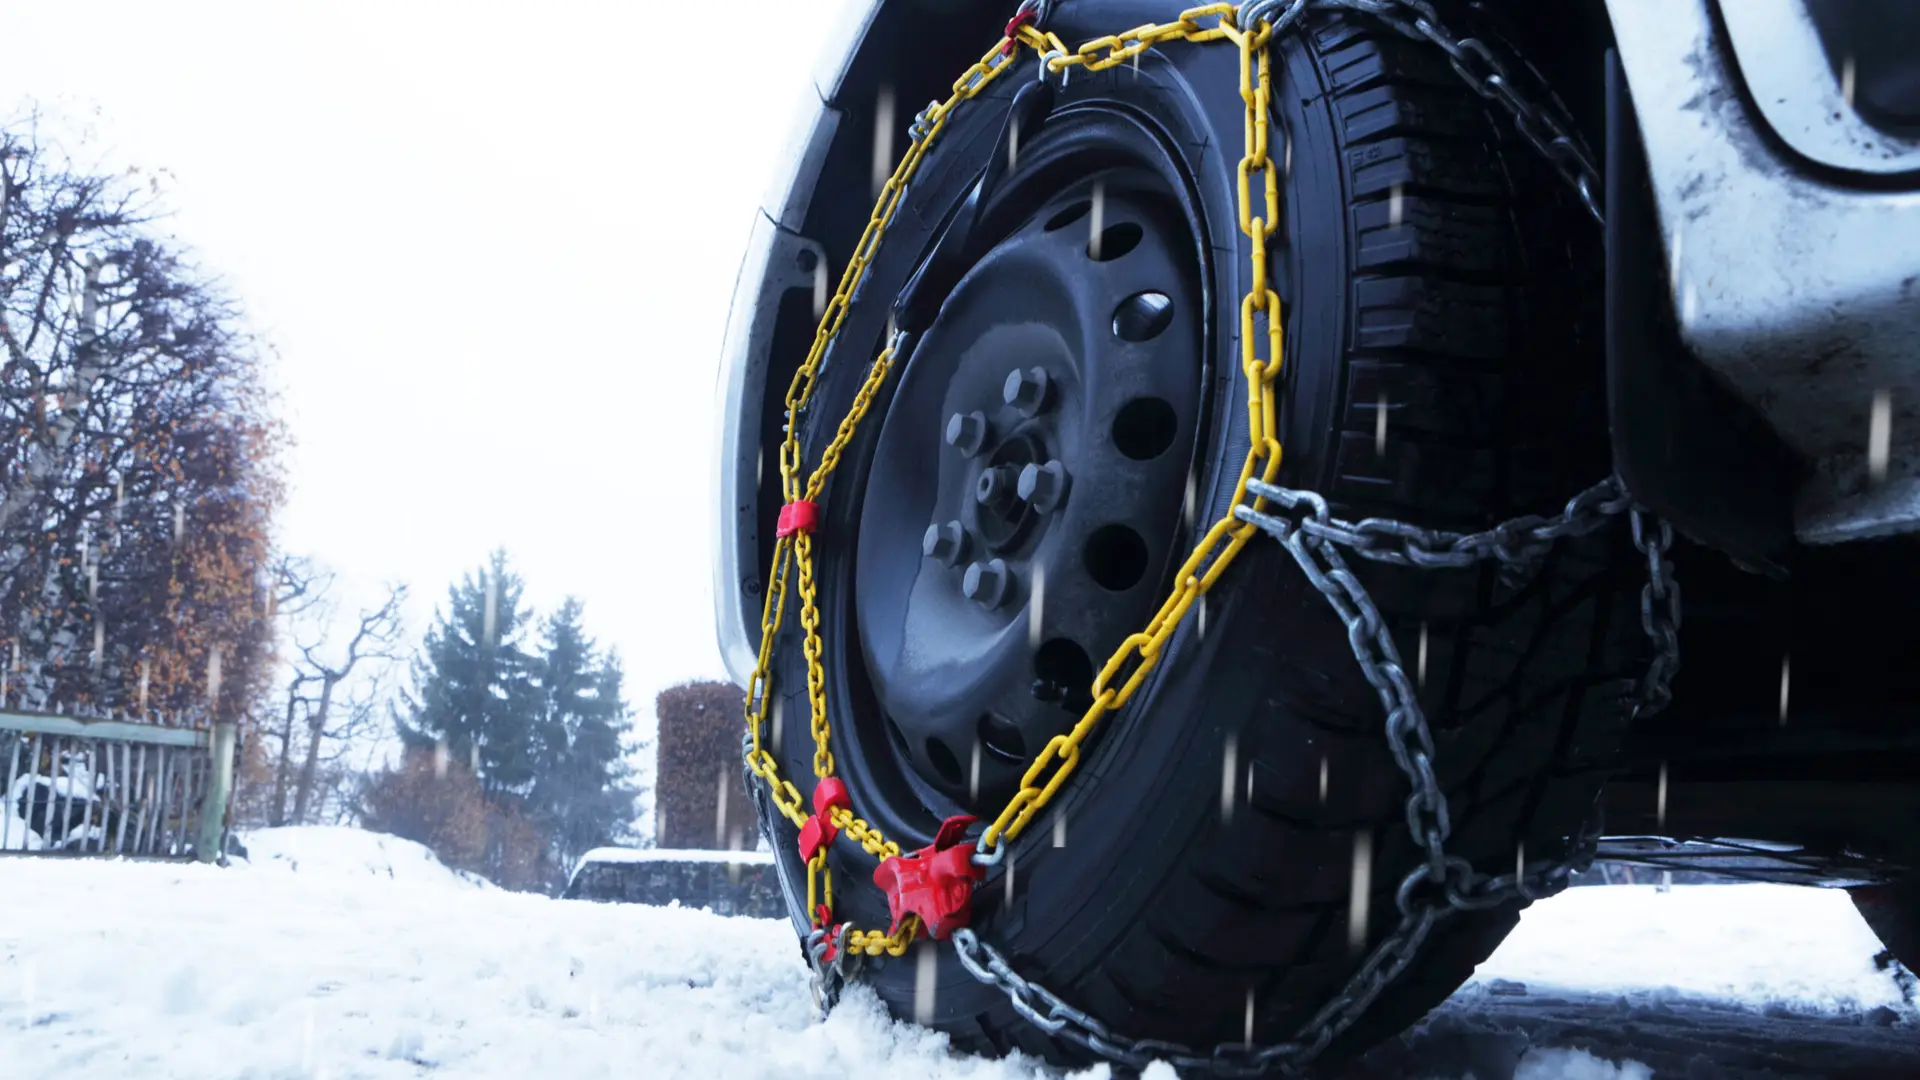 Tire Chain Laws by State